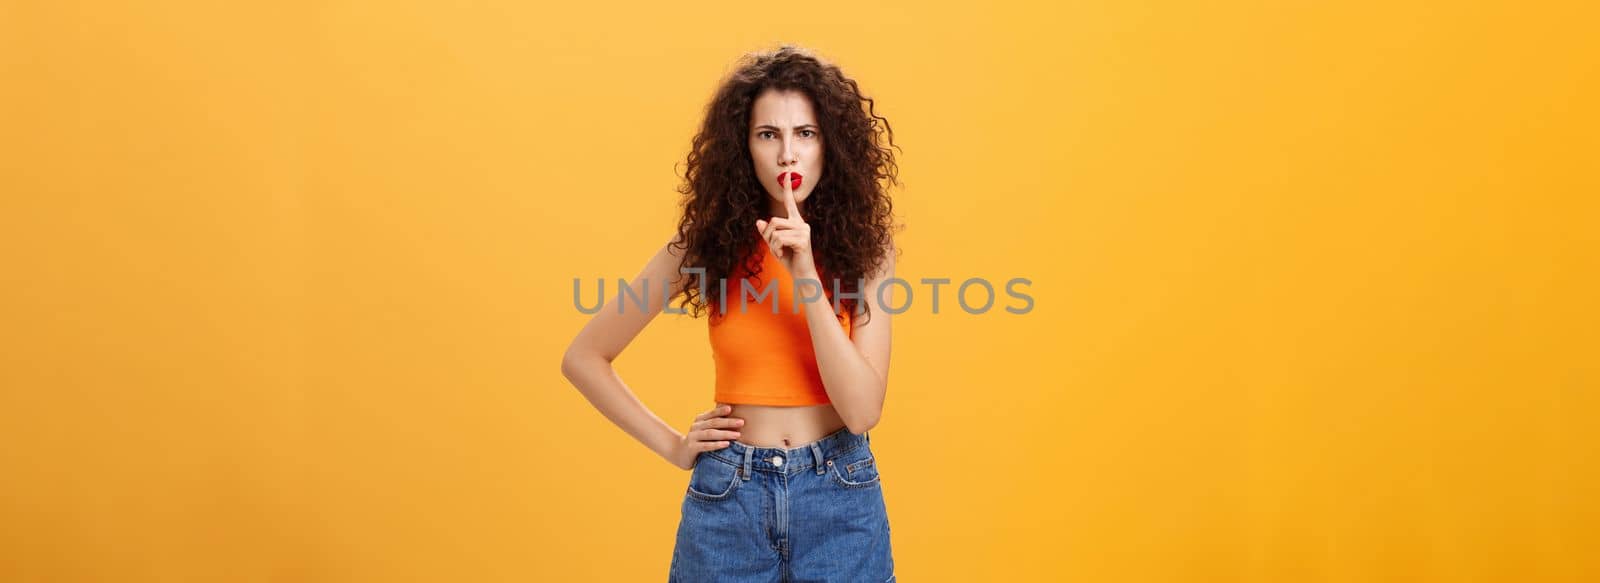 Sister displeased sibling saying cursing words standing serious and strict over orange background in stylish outfit shushing at camera saying shh with index finger over mouth demanding obey rules. Emotions concept